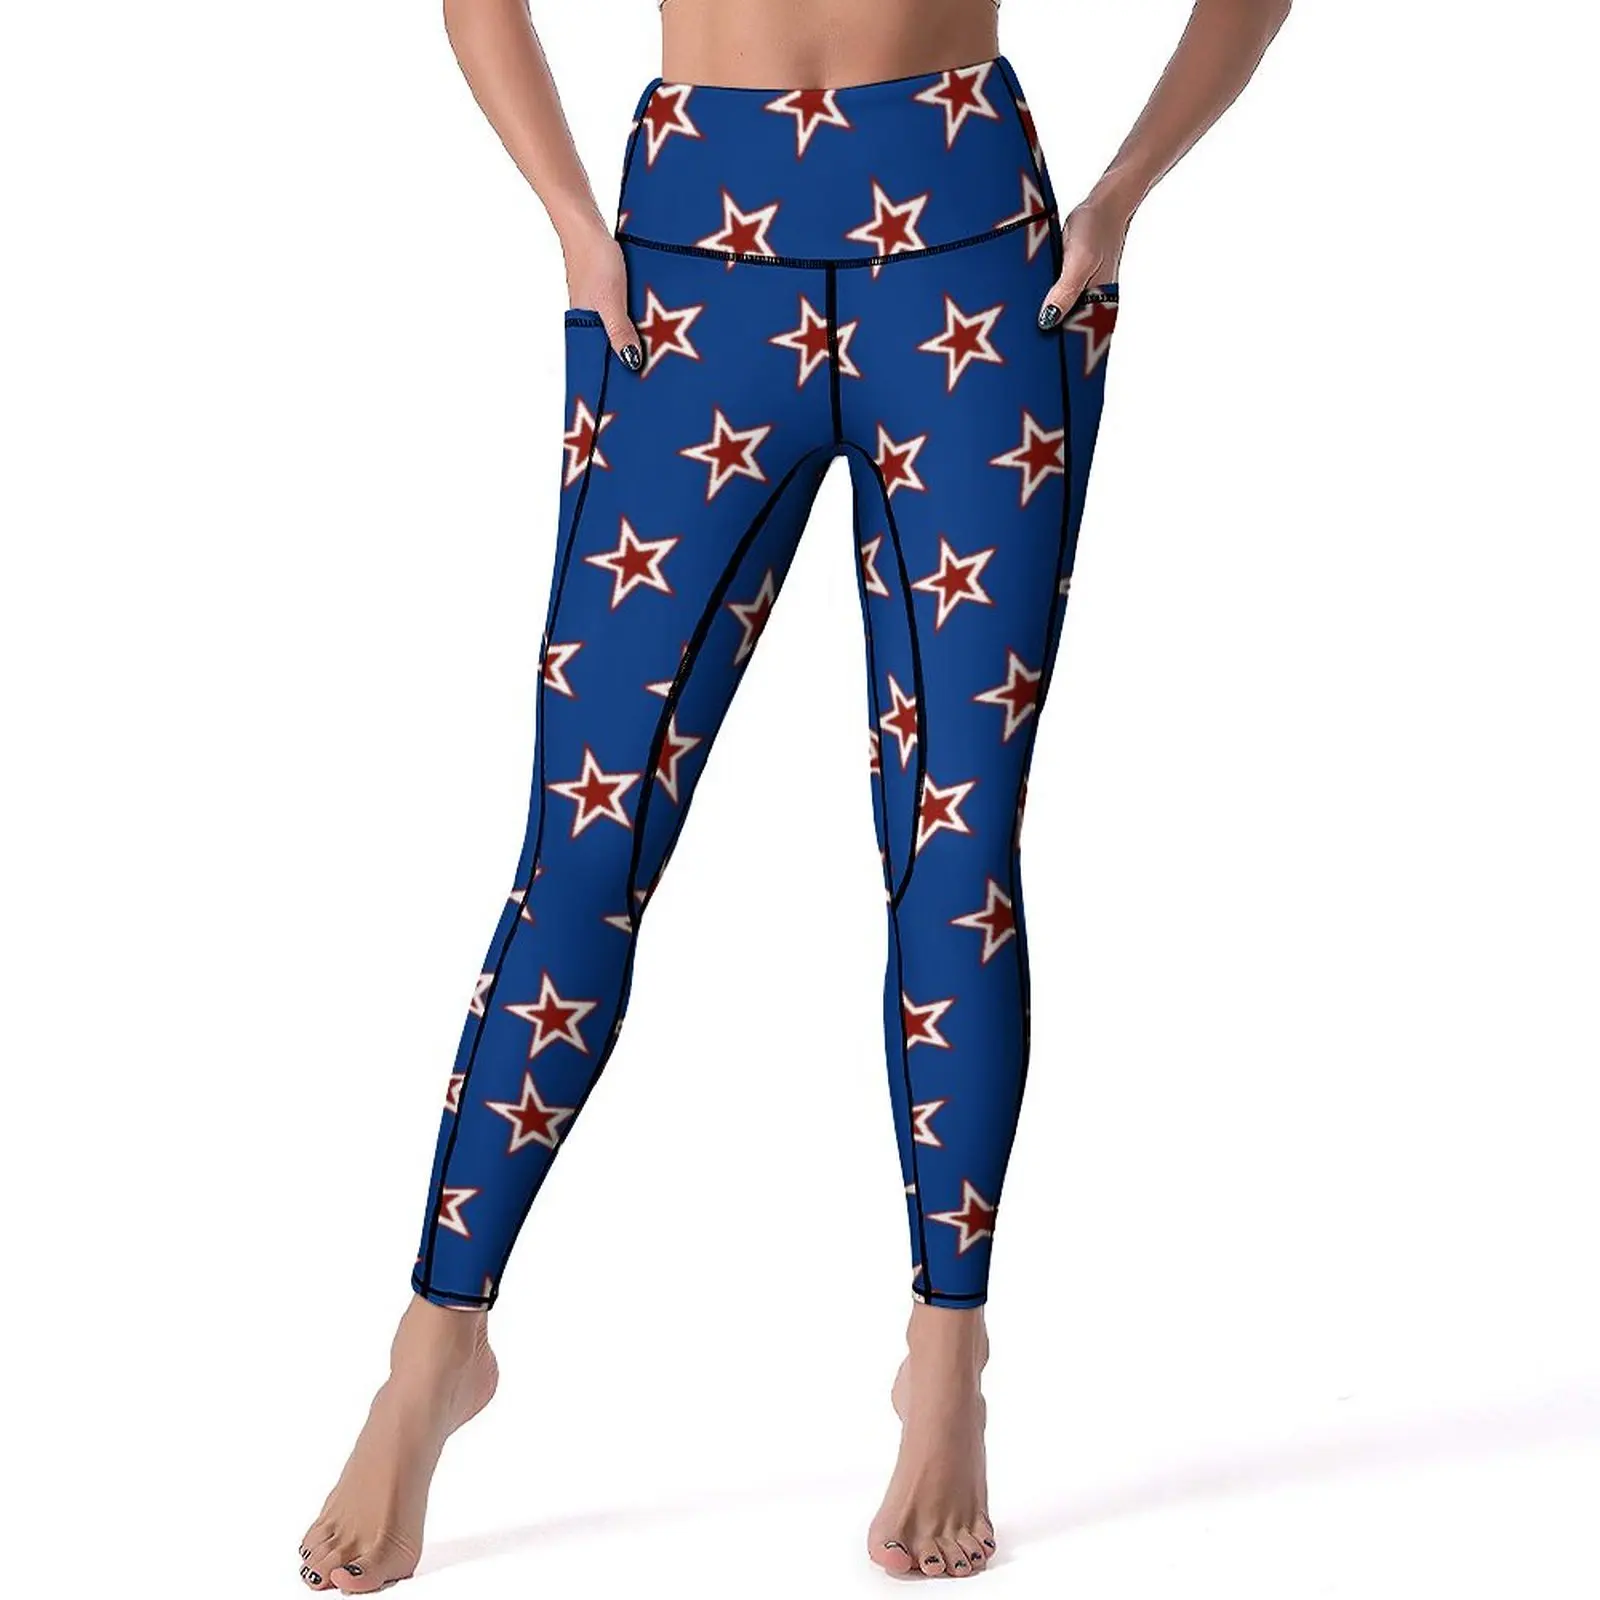 

Stars Print Leggings Sexy Red White and Blue Fitness Yoga Pants High Waist Stretch Sports Tights Pockets Sweet Graphic Leggins